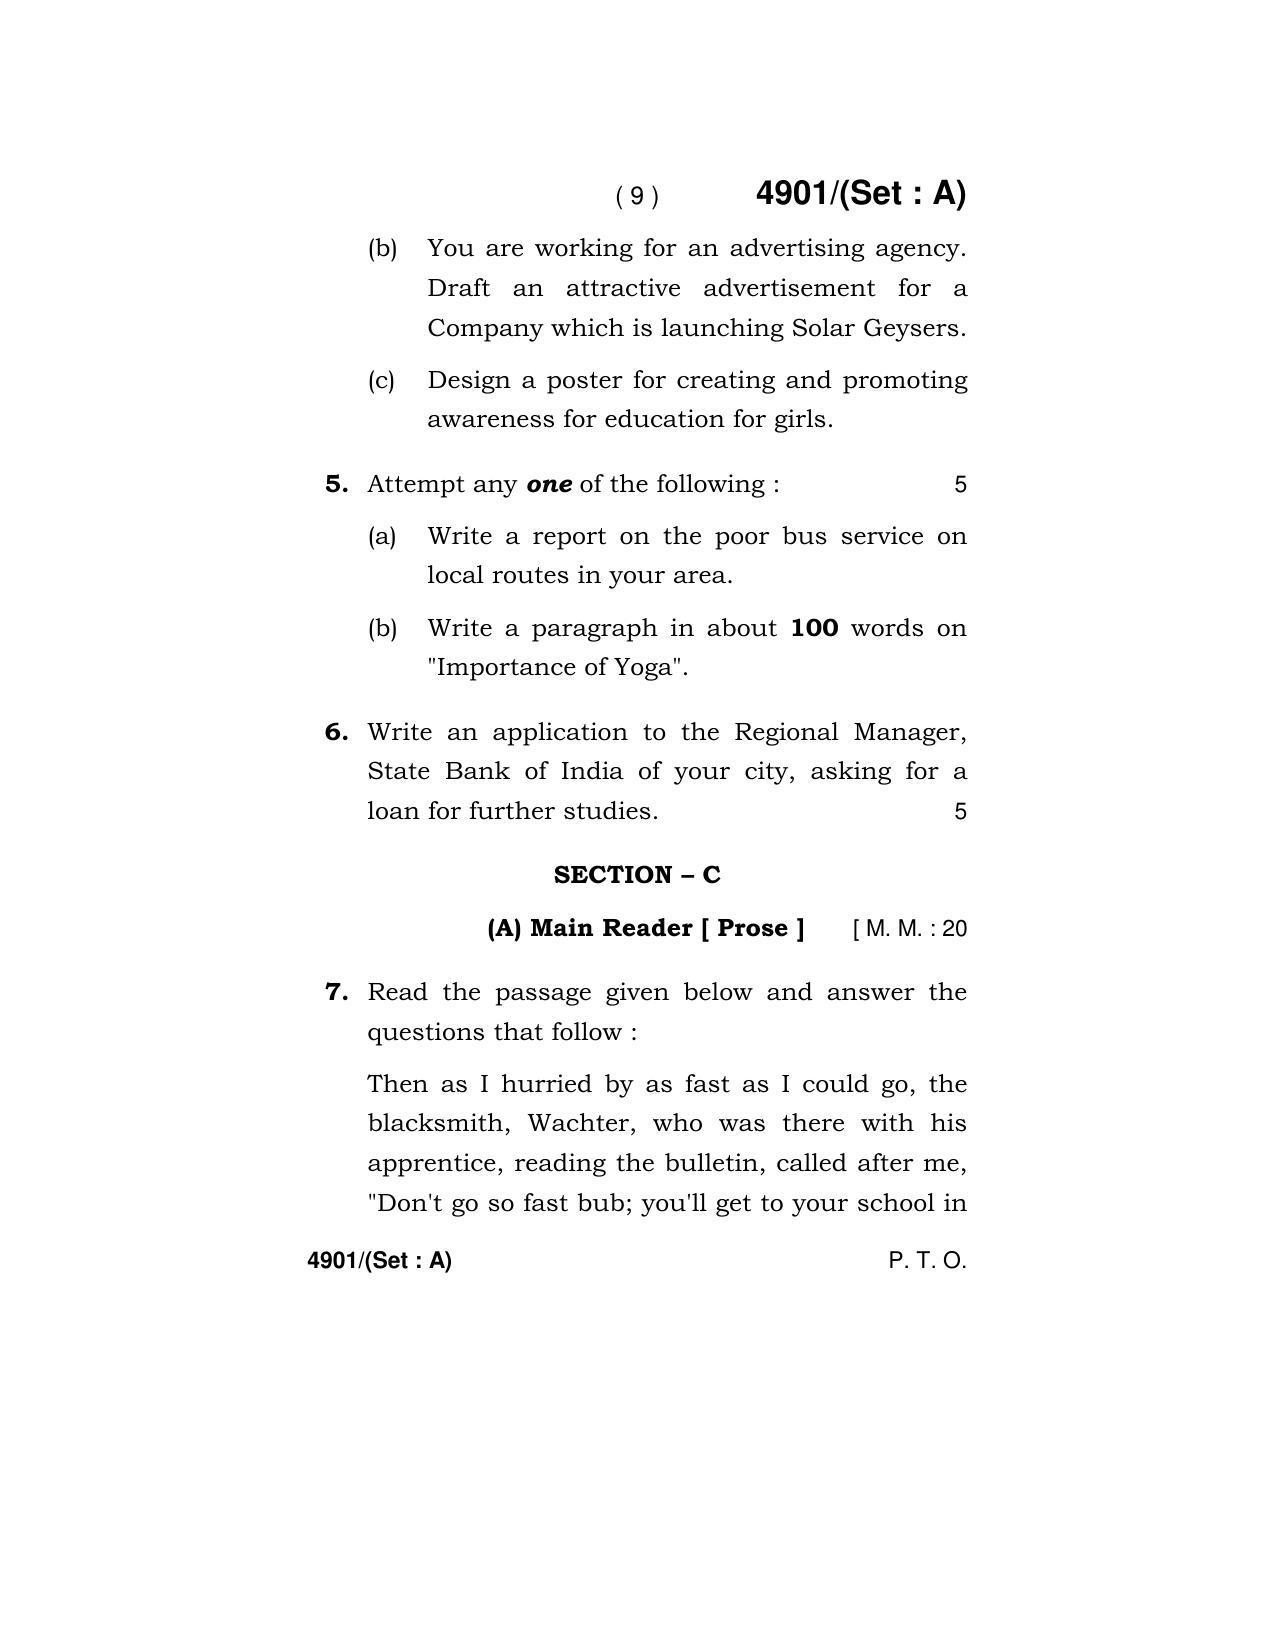 Haryana Board HBSE Class 12 English Core 2020 Question Paper - Page 9